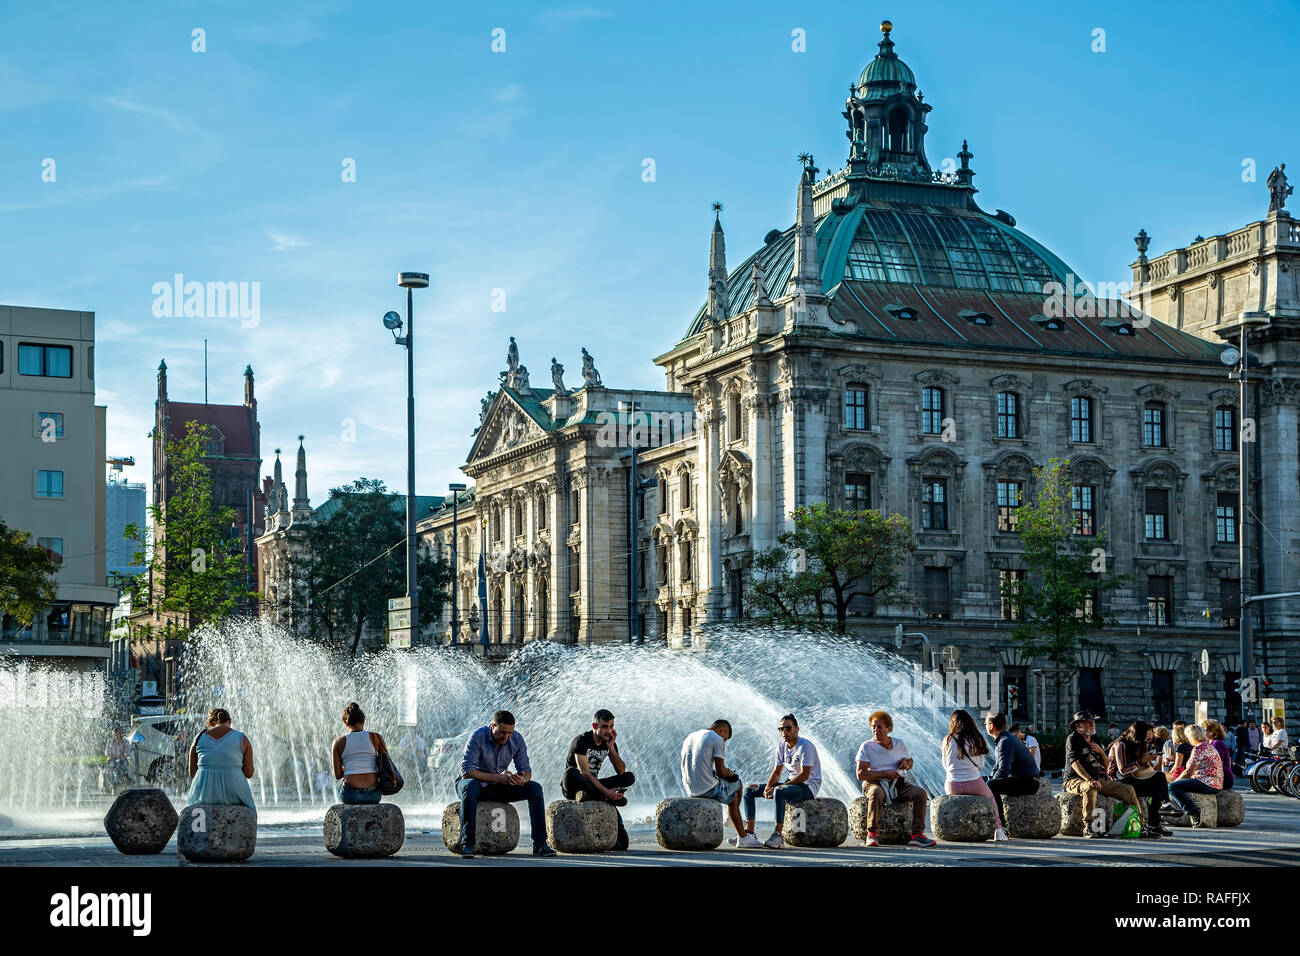 District Court Building and people sitting next to fountain, Munich, Germany Stock Photo